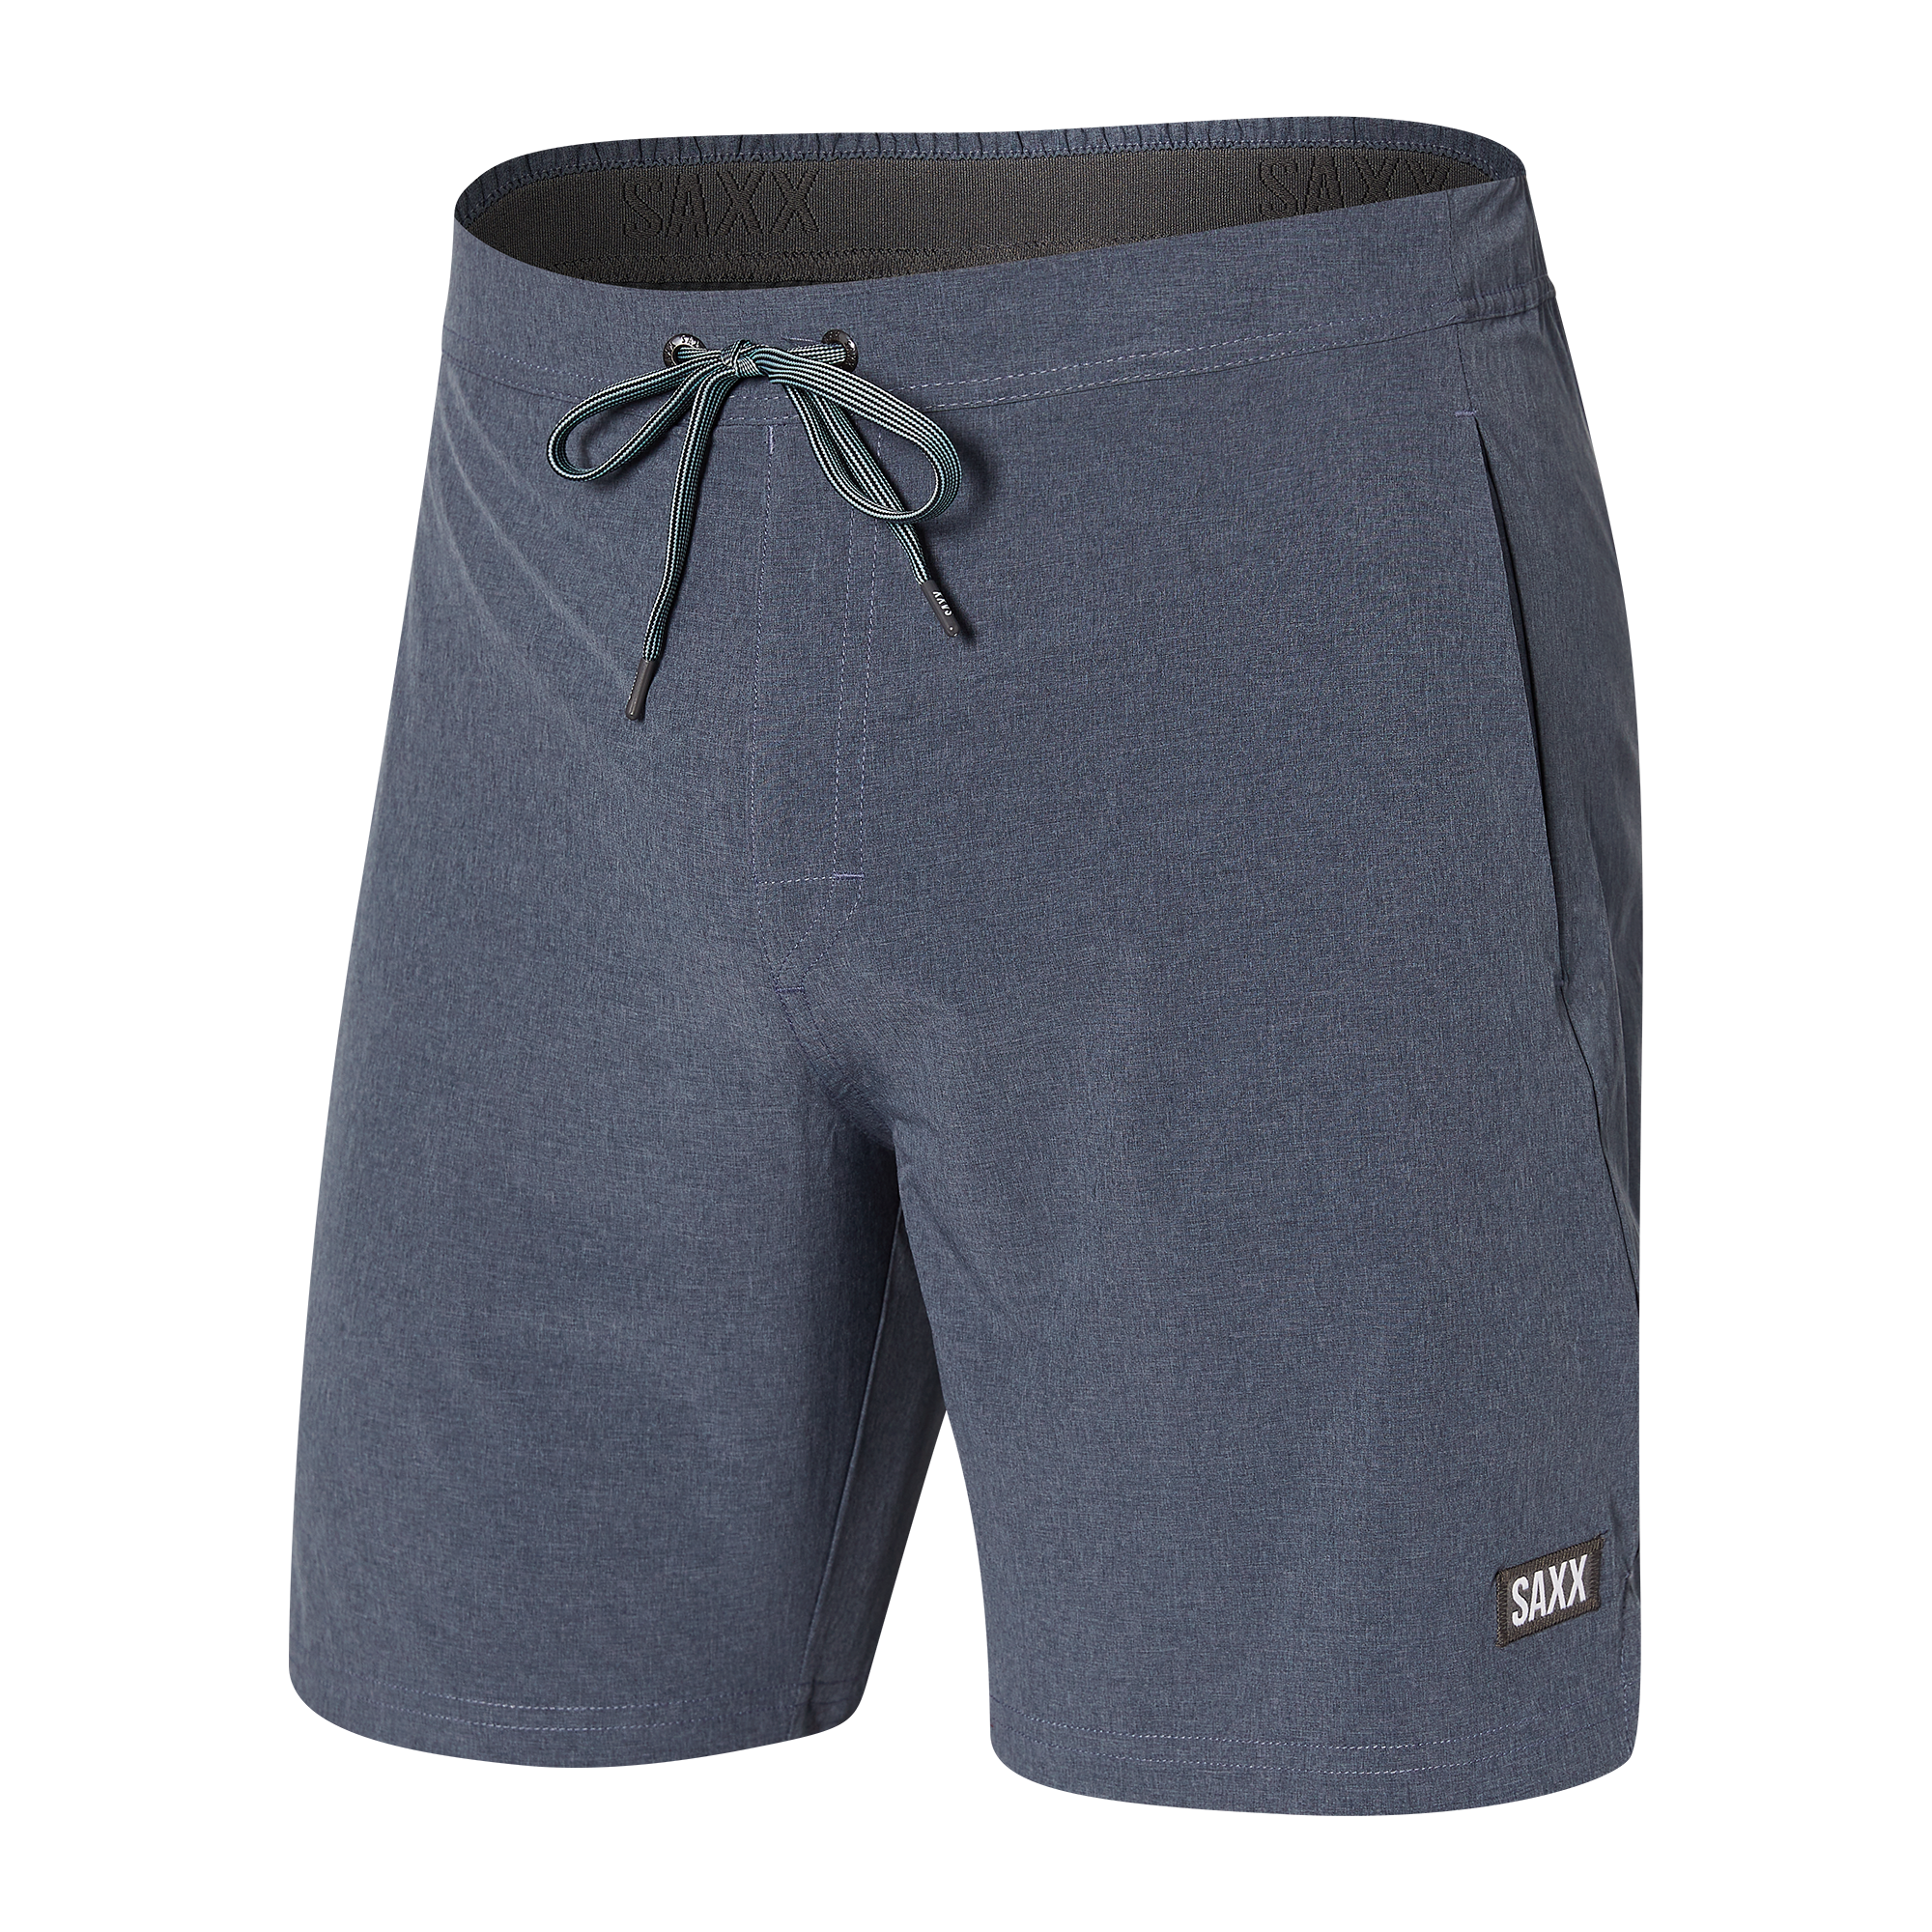  Saxx Men's Underwear - Sport 2 Life 2N1 Short 7 with Built-in  Pouch Support - Shorts for Men, Fall : Clothing, Shoes & Jewelry